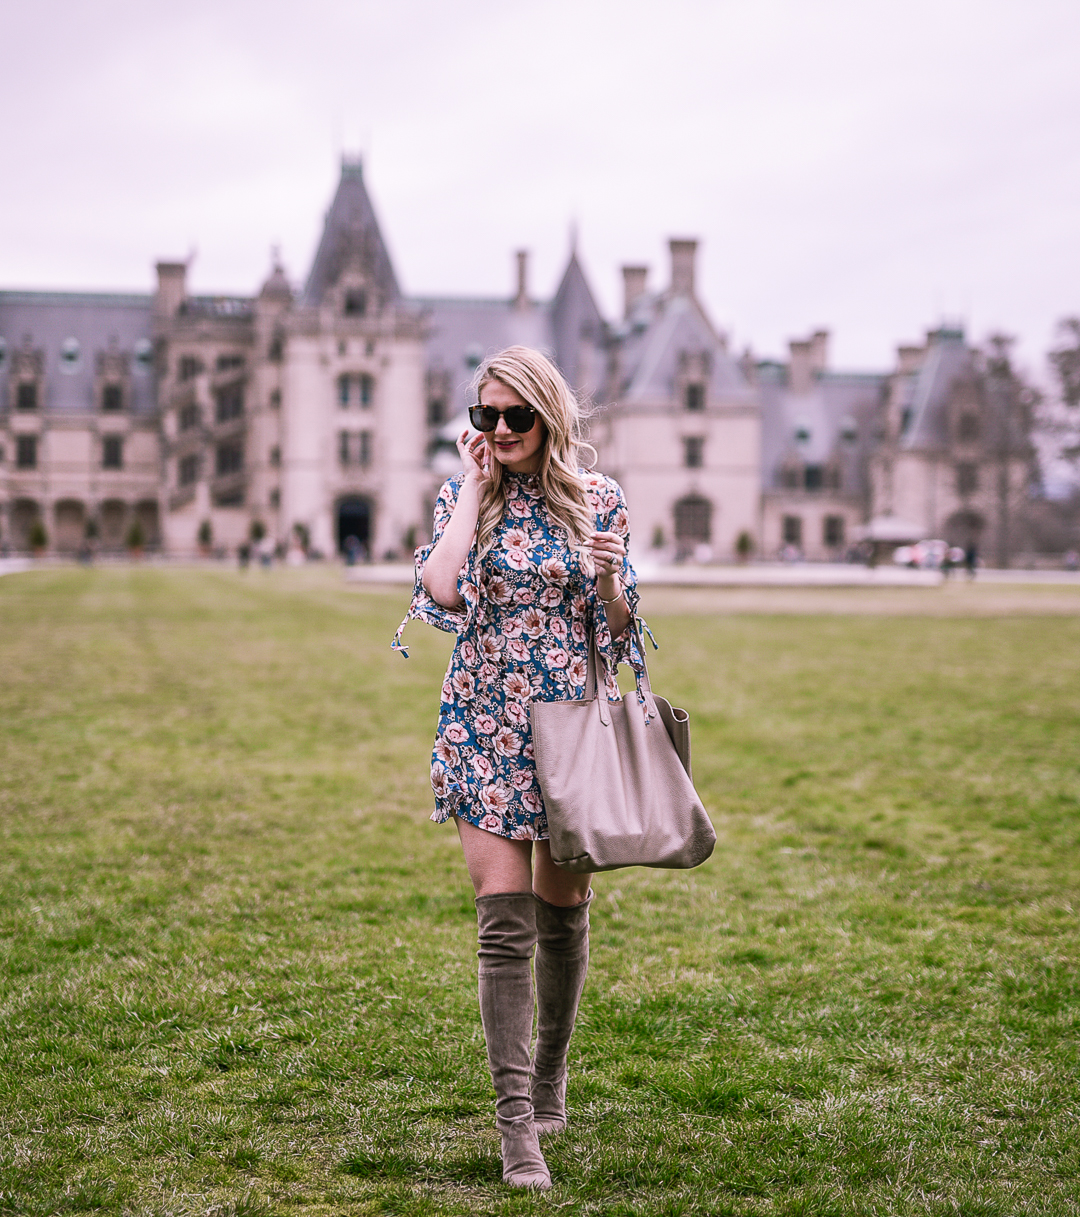 Jenna Colgrove wearing a teal high neck floral dress by Topshop. - A Weekend in Asheville by popular Chicago travel blogger Visions of Vogue